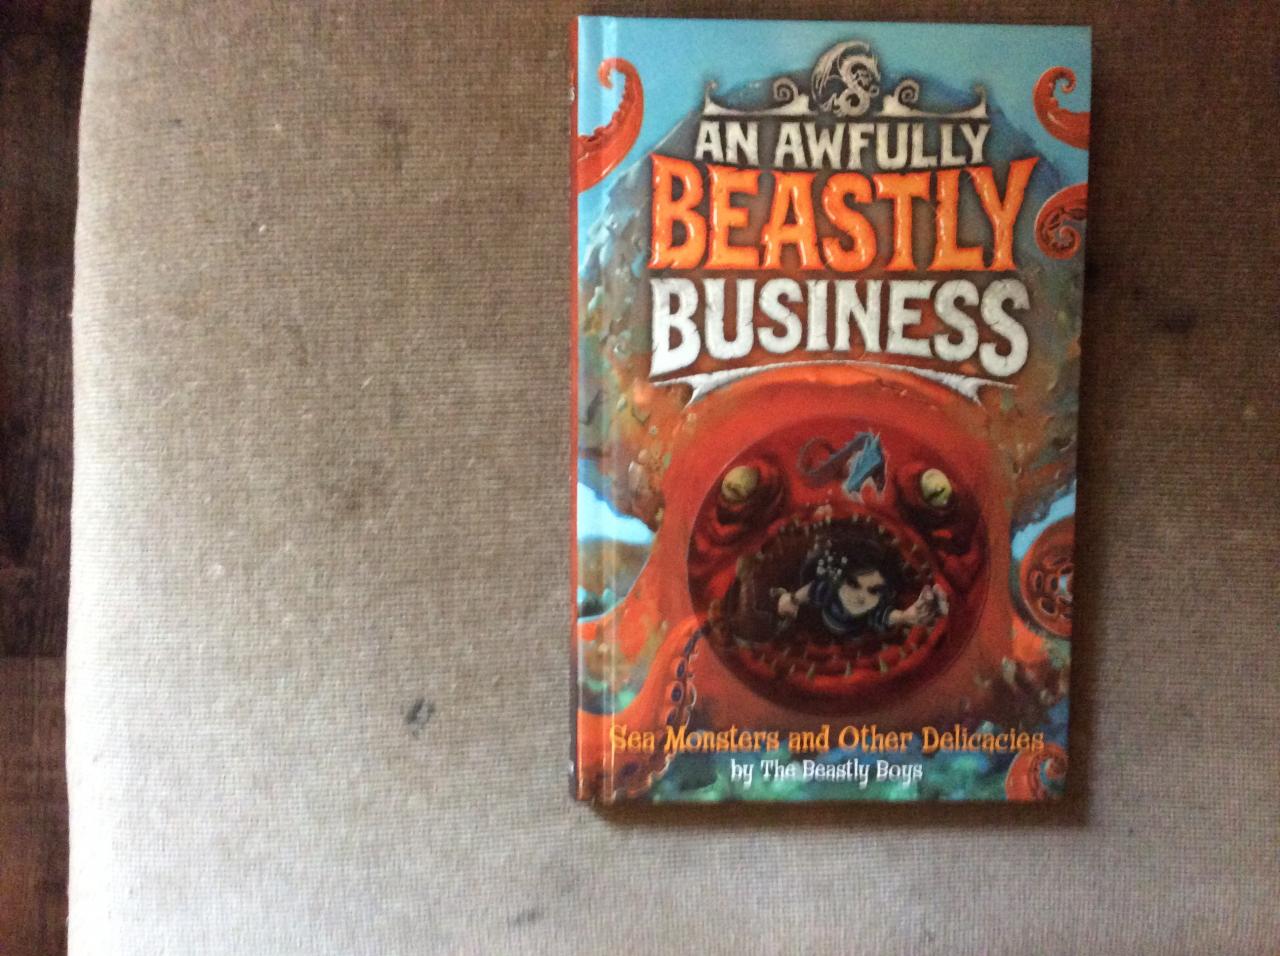 An awfully beastly business books